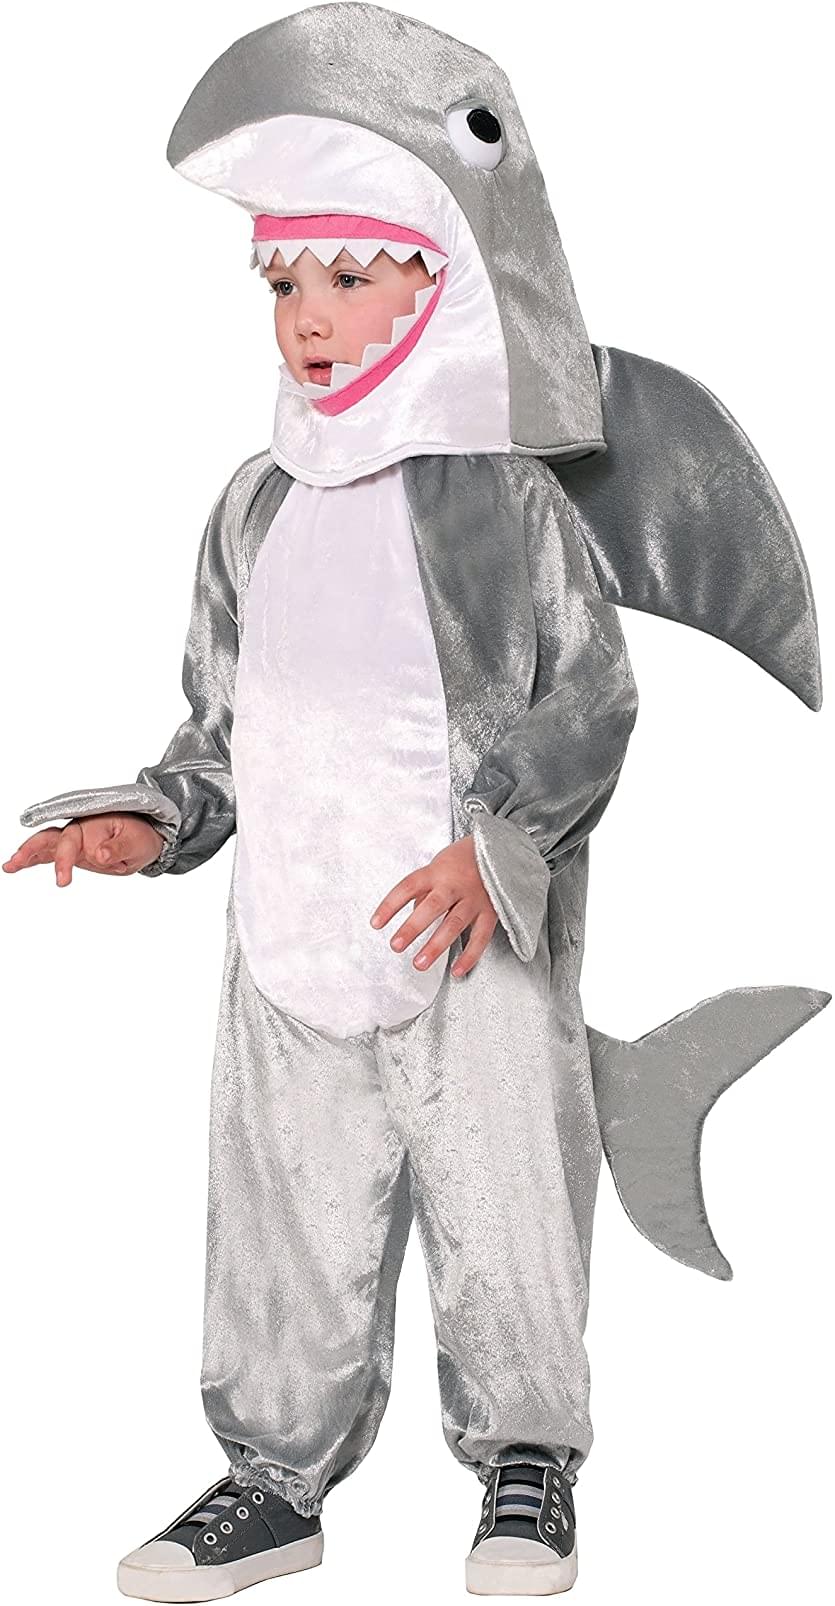 Photos - Fancy Dress Great White Gray Shark Child Costume FRM-73849-C 